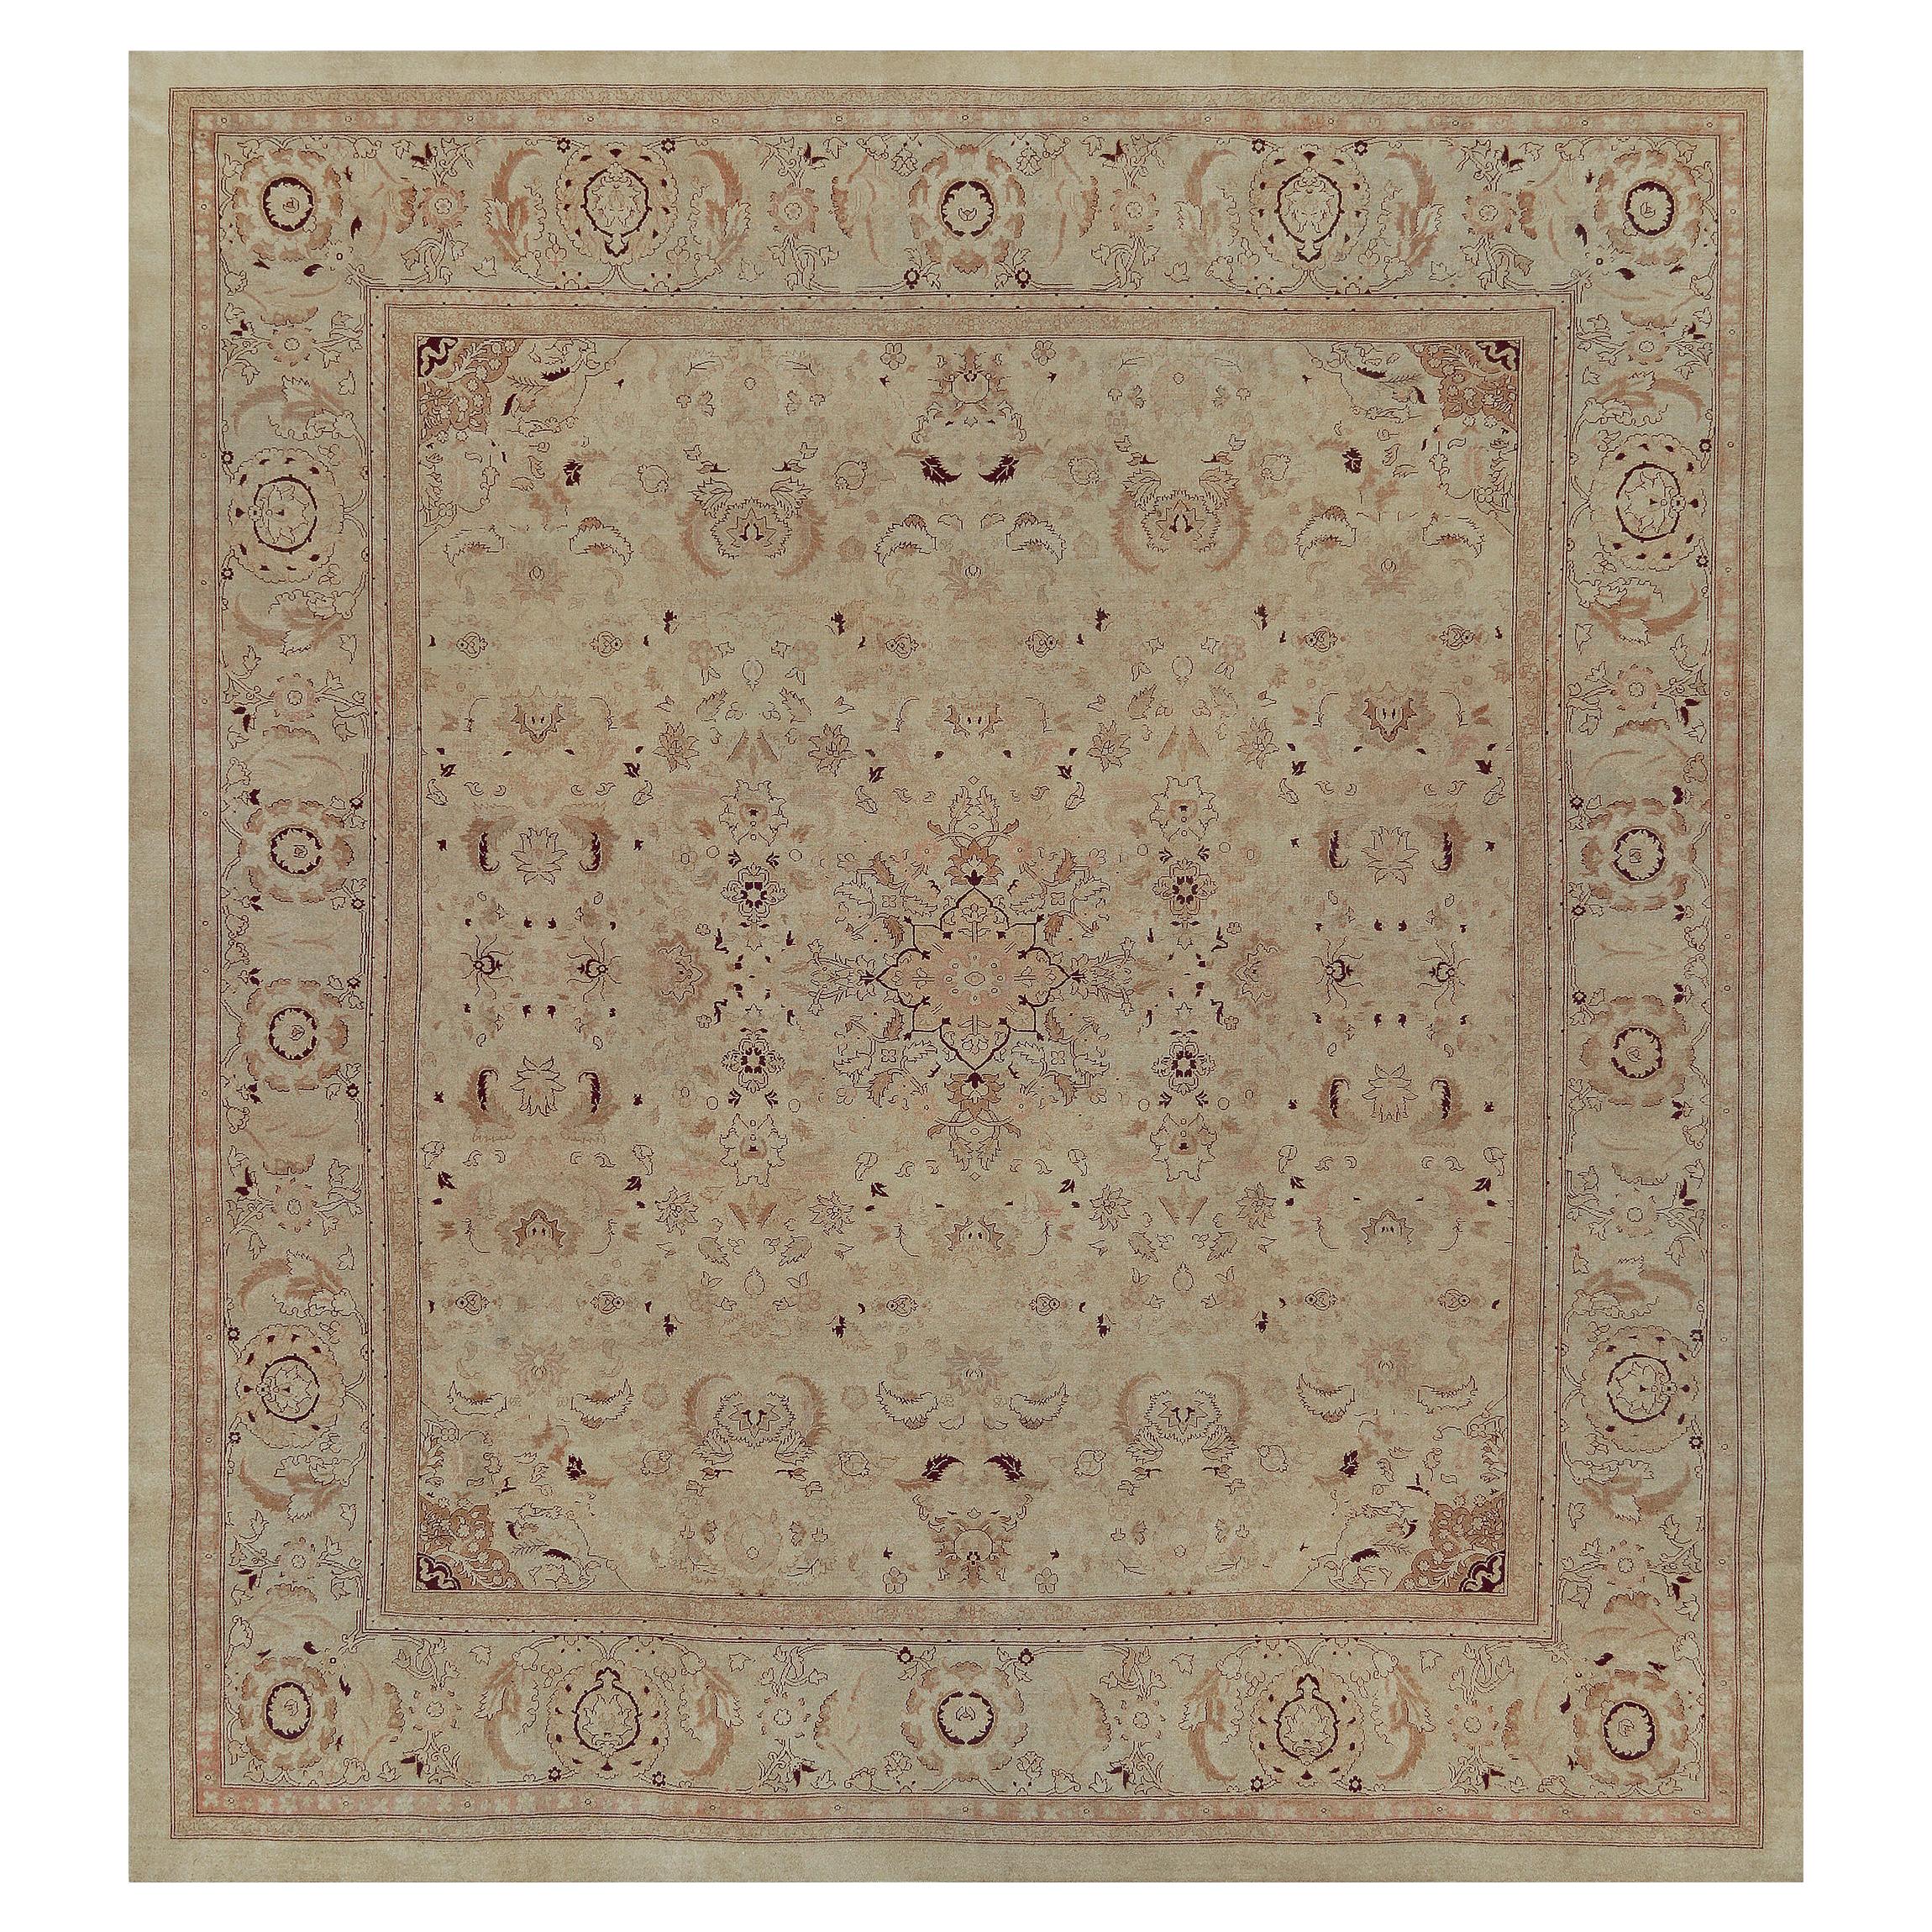 Traditional Hand-woven Wool Indian Agra Rug